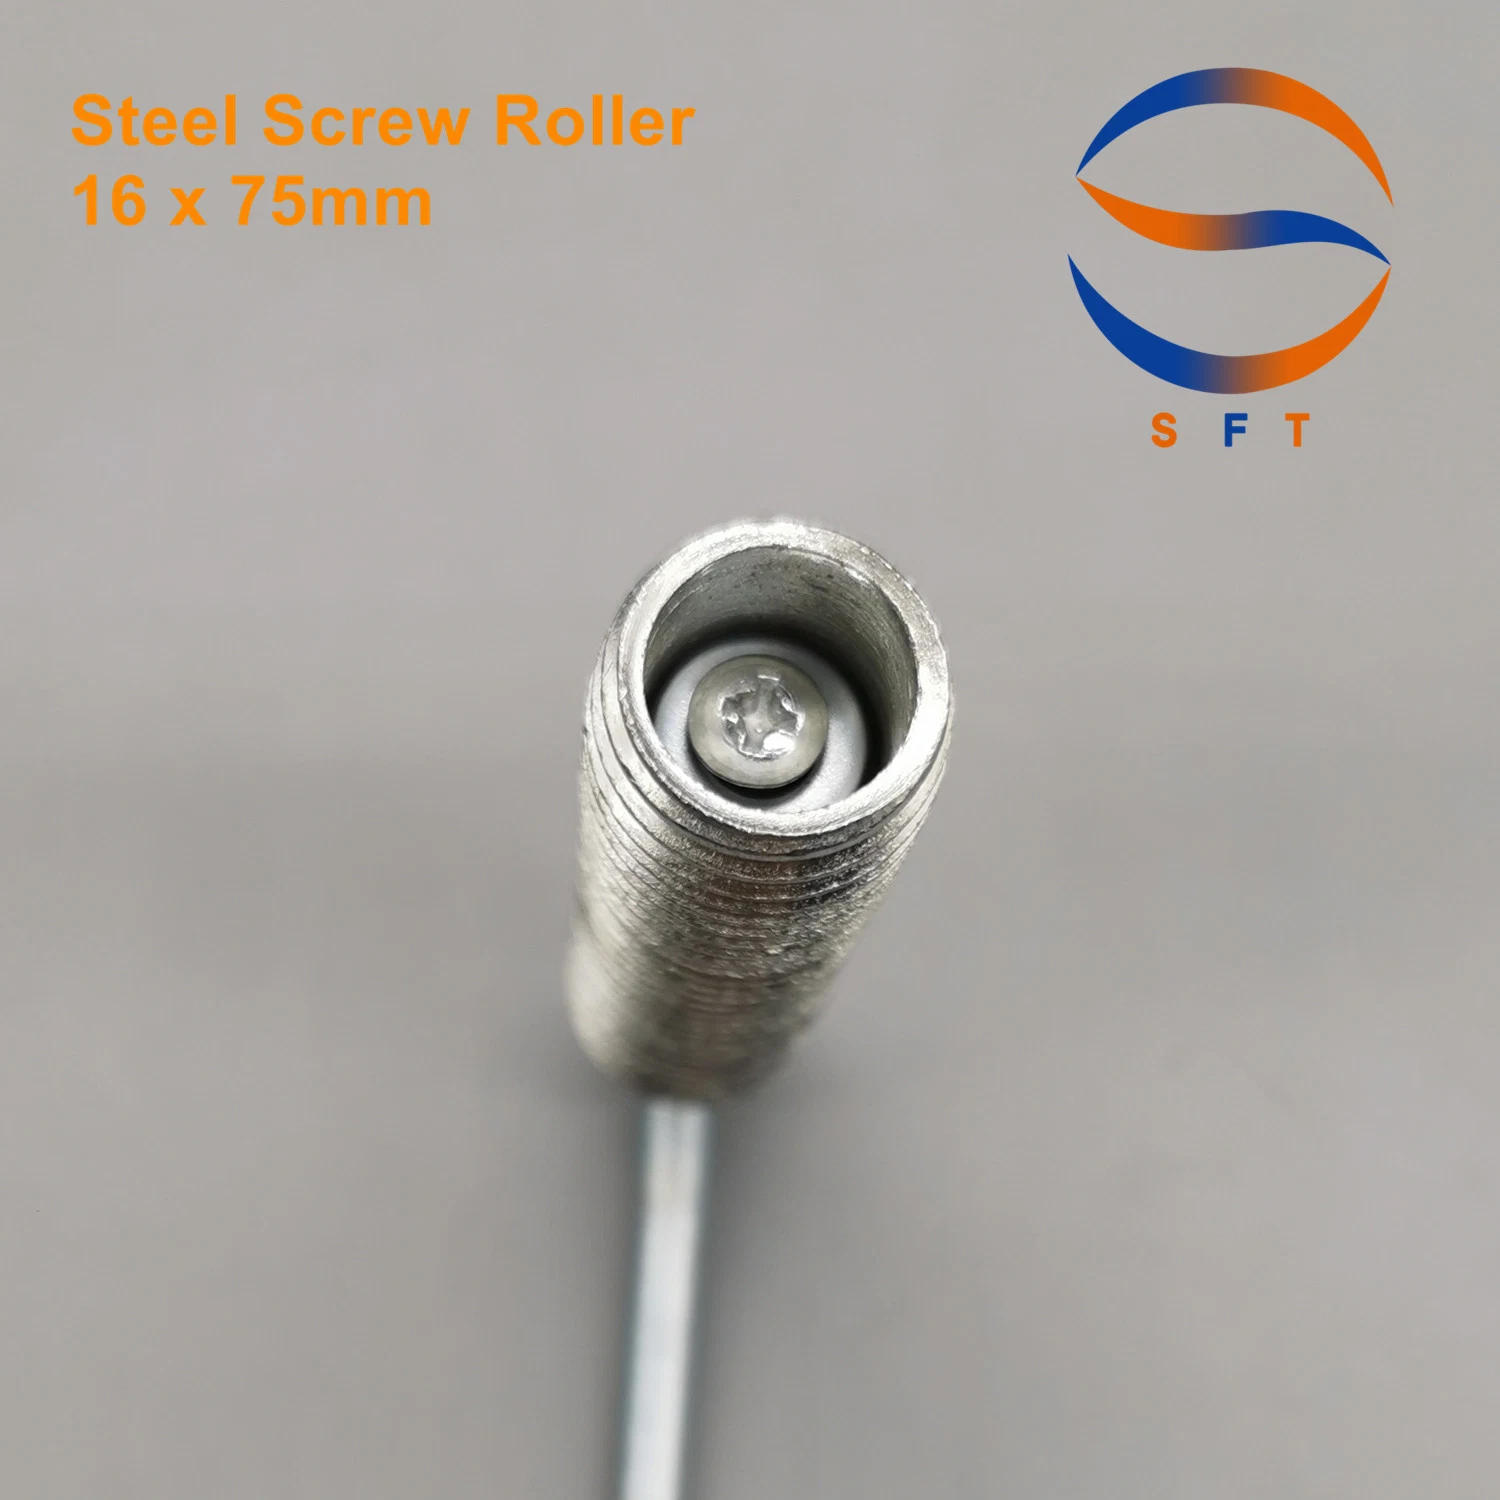 Metal Paint Roller Steel Screw Rollers for GRP Laminating